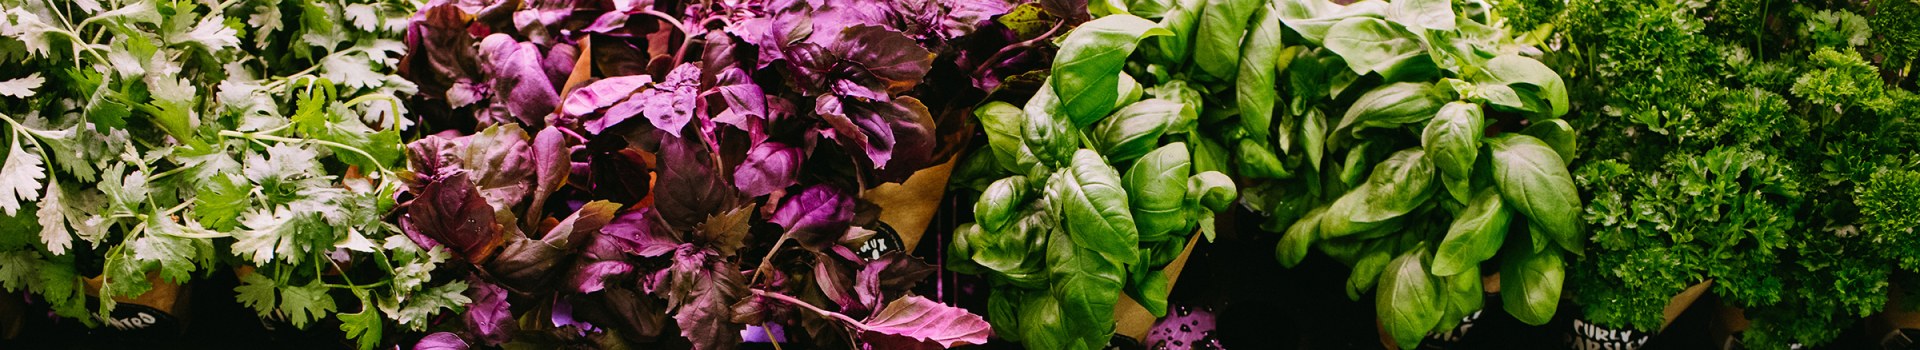 A picture of basil & parley green and purple leaves